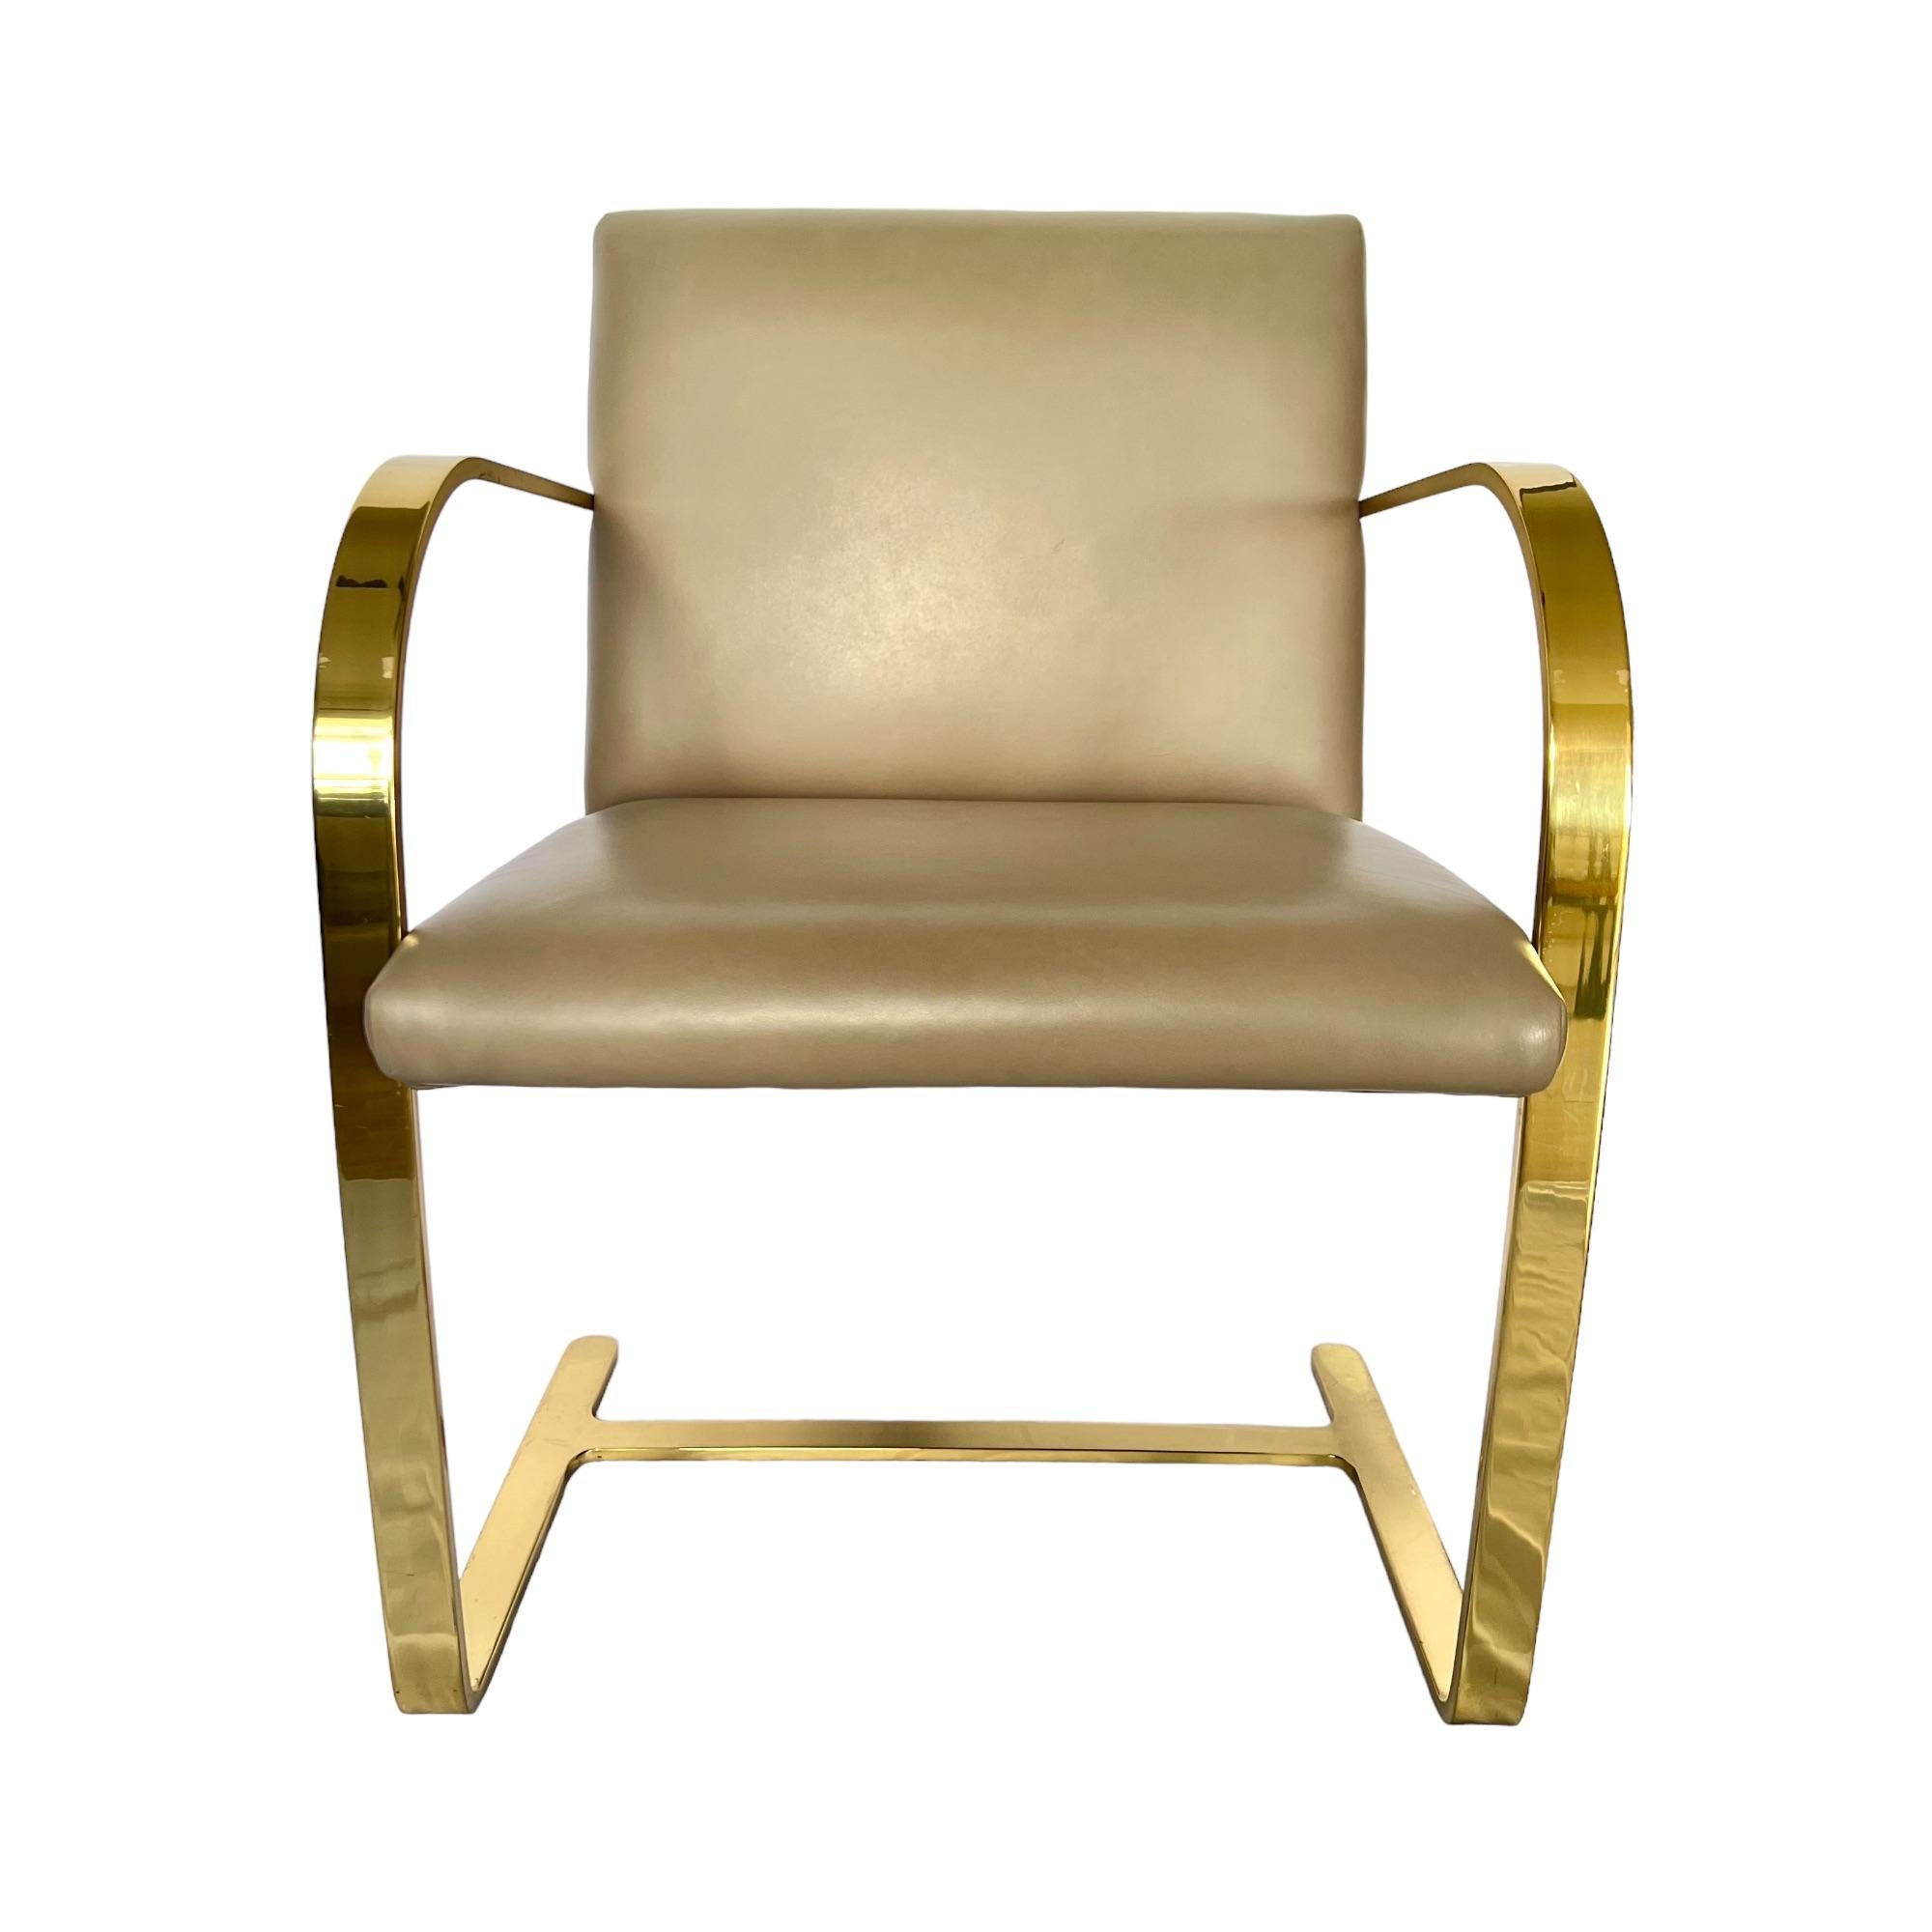 Mies Van Der Rohe Brno Gold Brass Flat Bar Leather Chairs, a Pair In Good Condition For Sale In Harlingen, TX